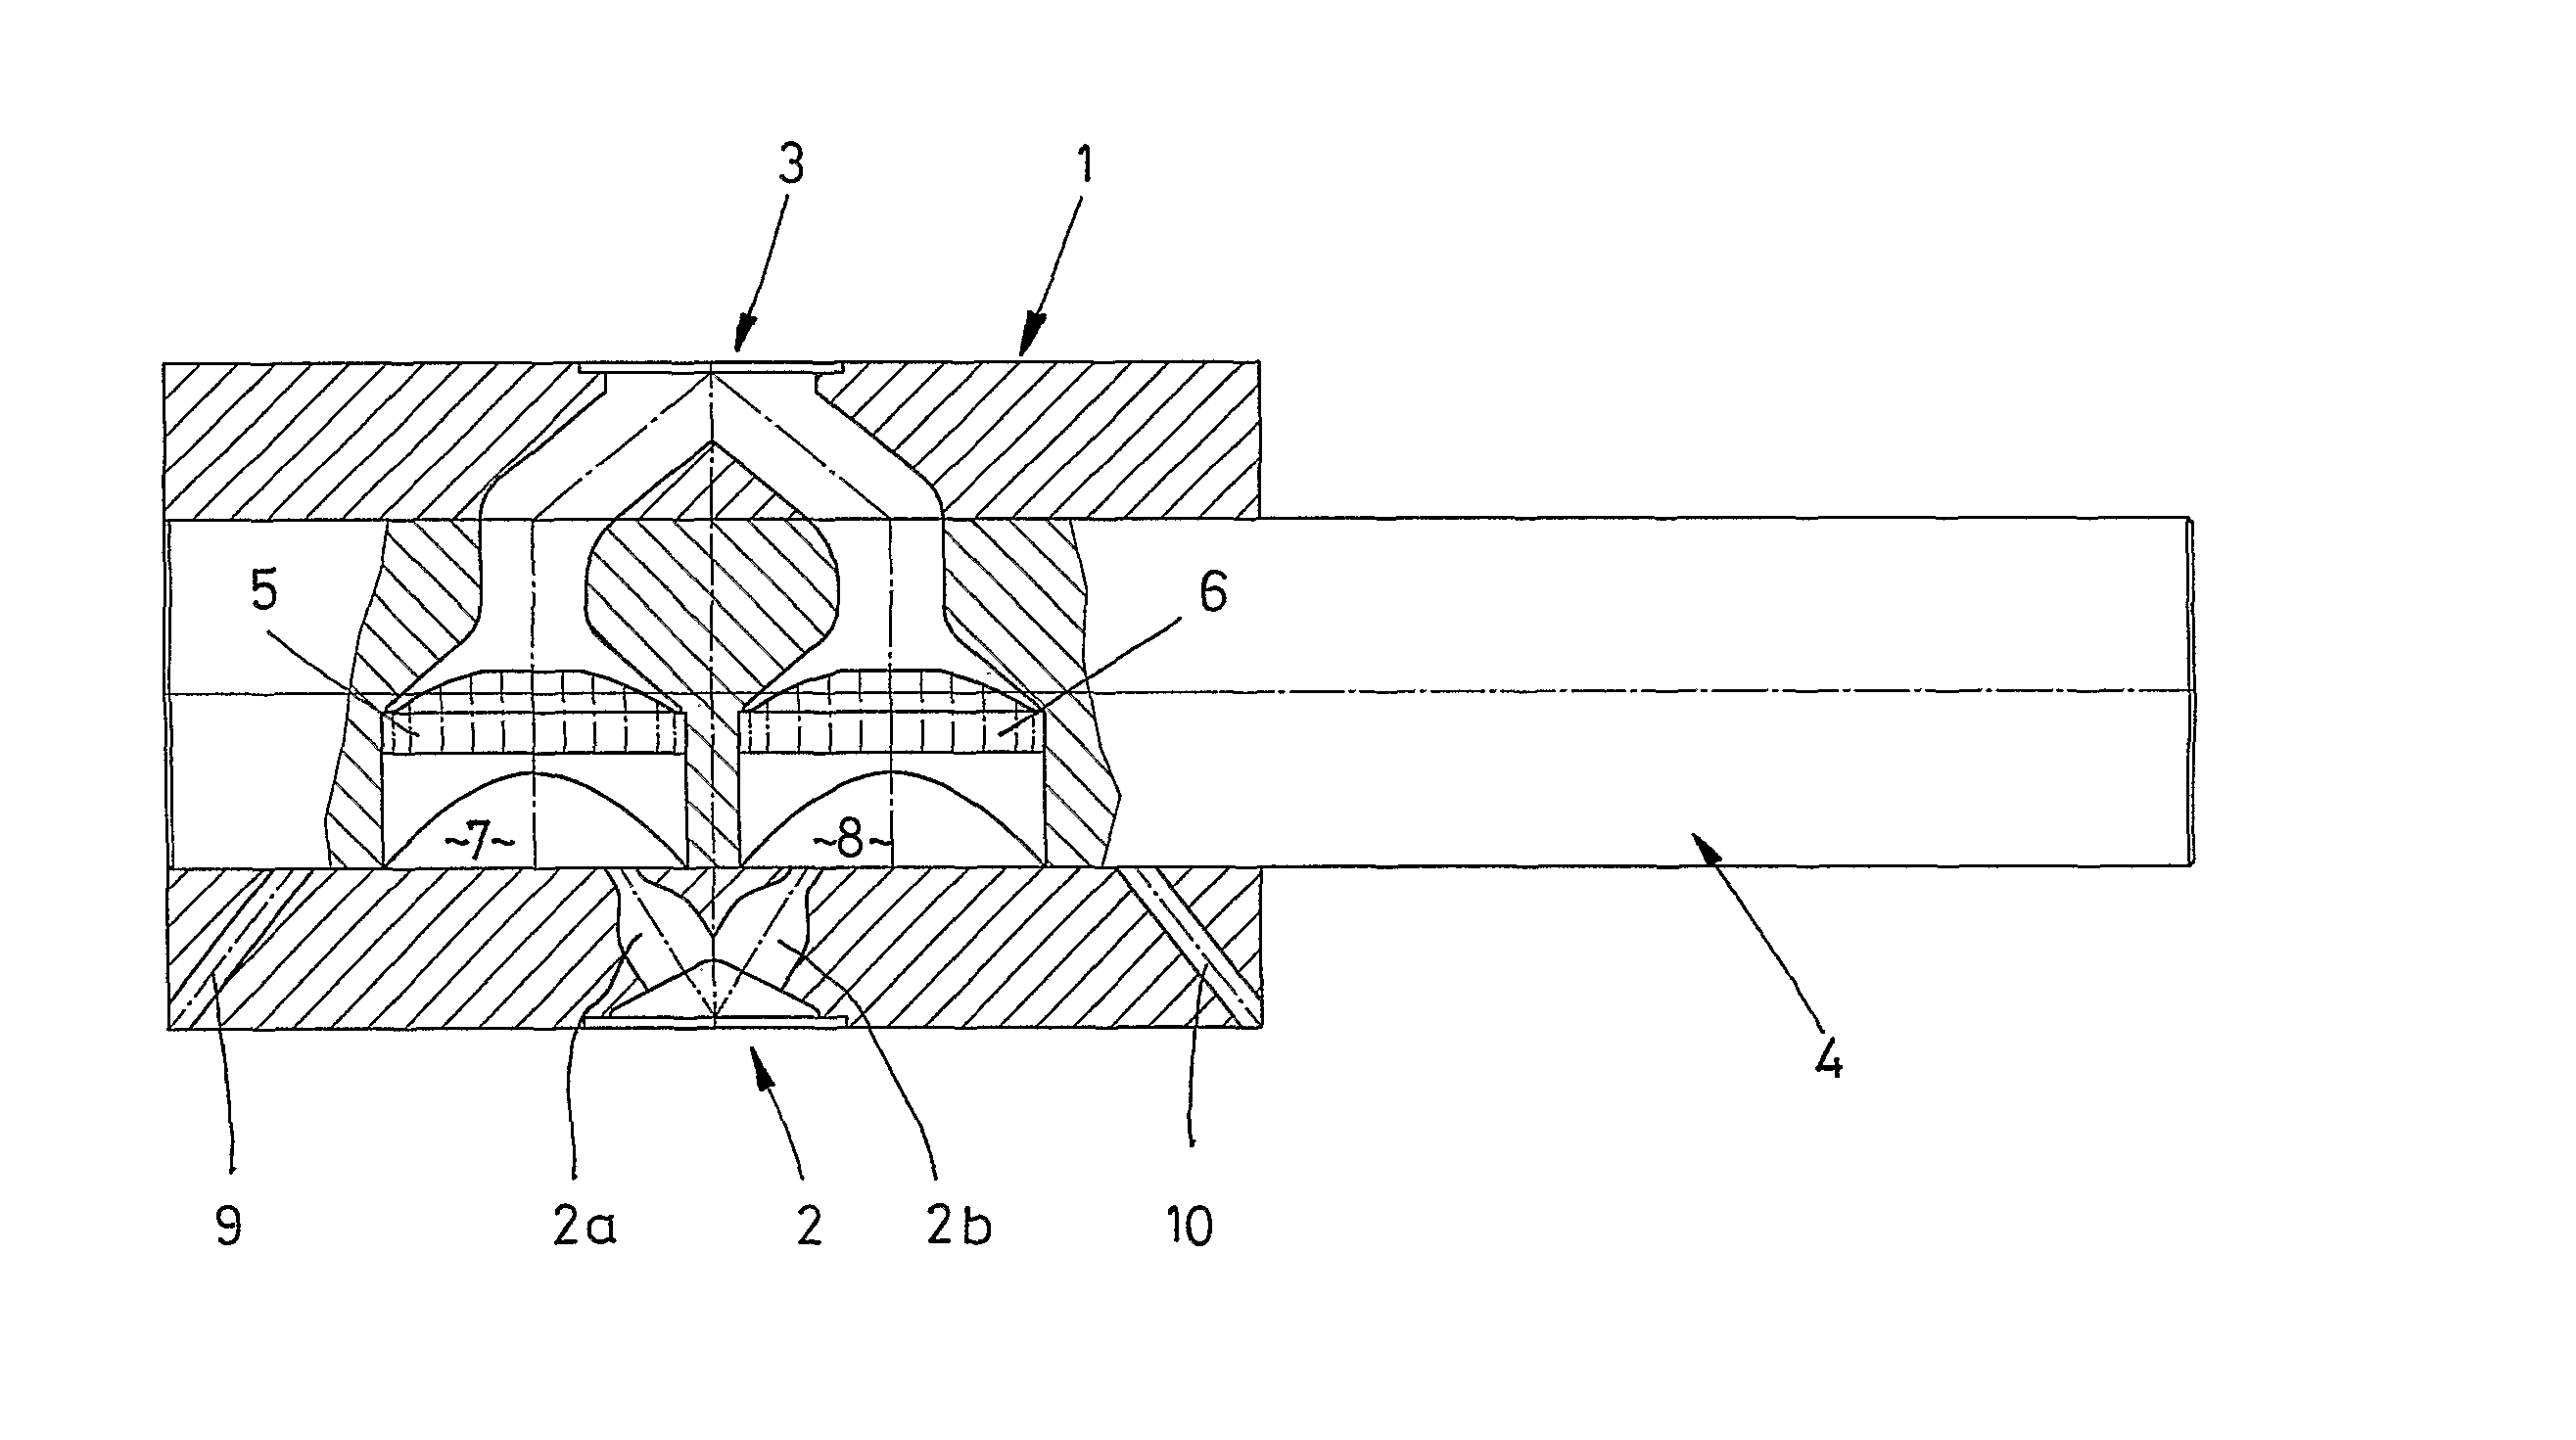 Device for filtering a liquefied synthetic material